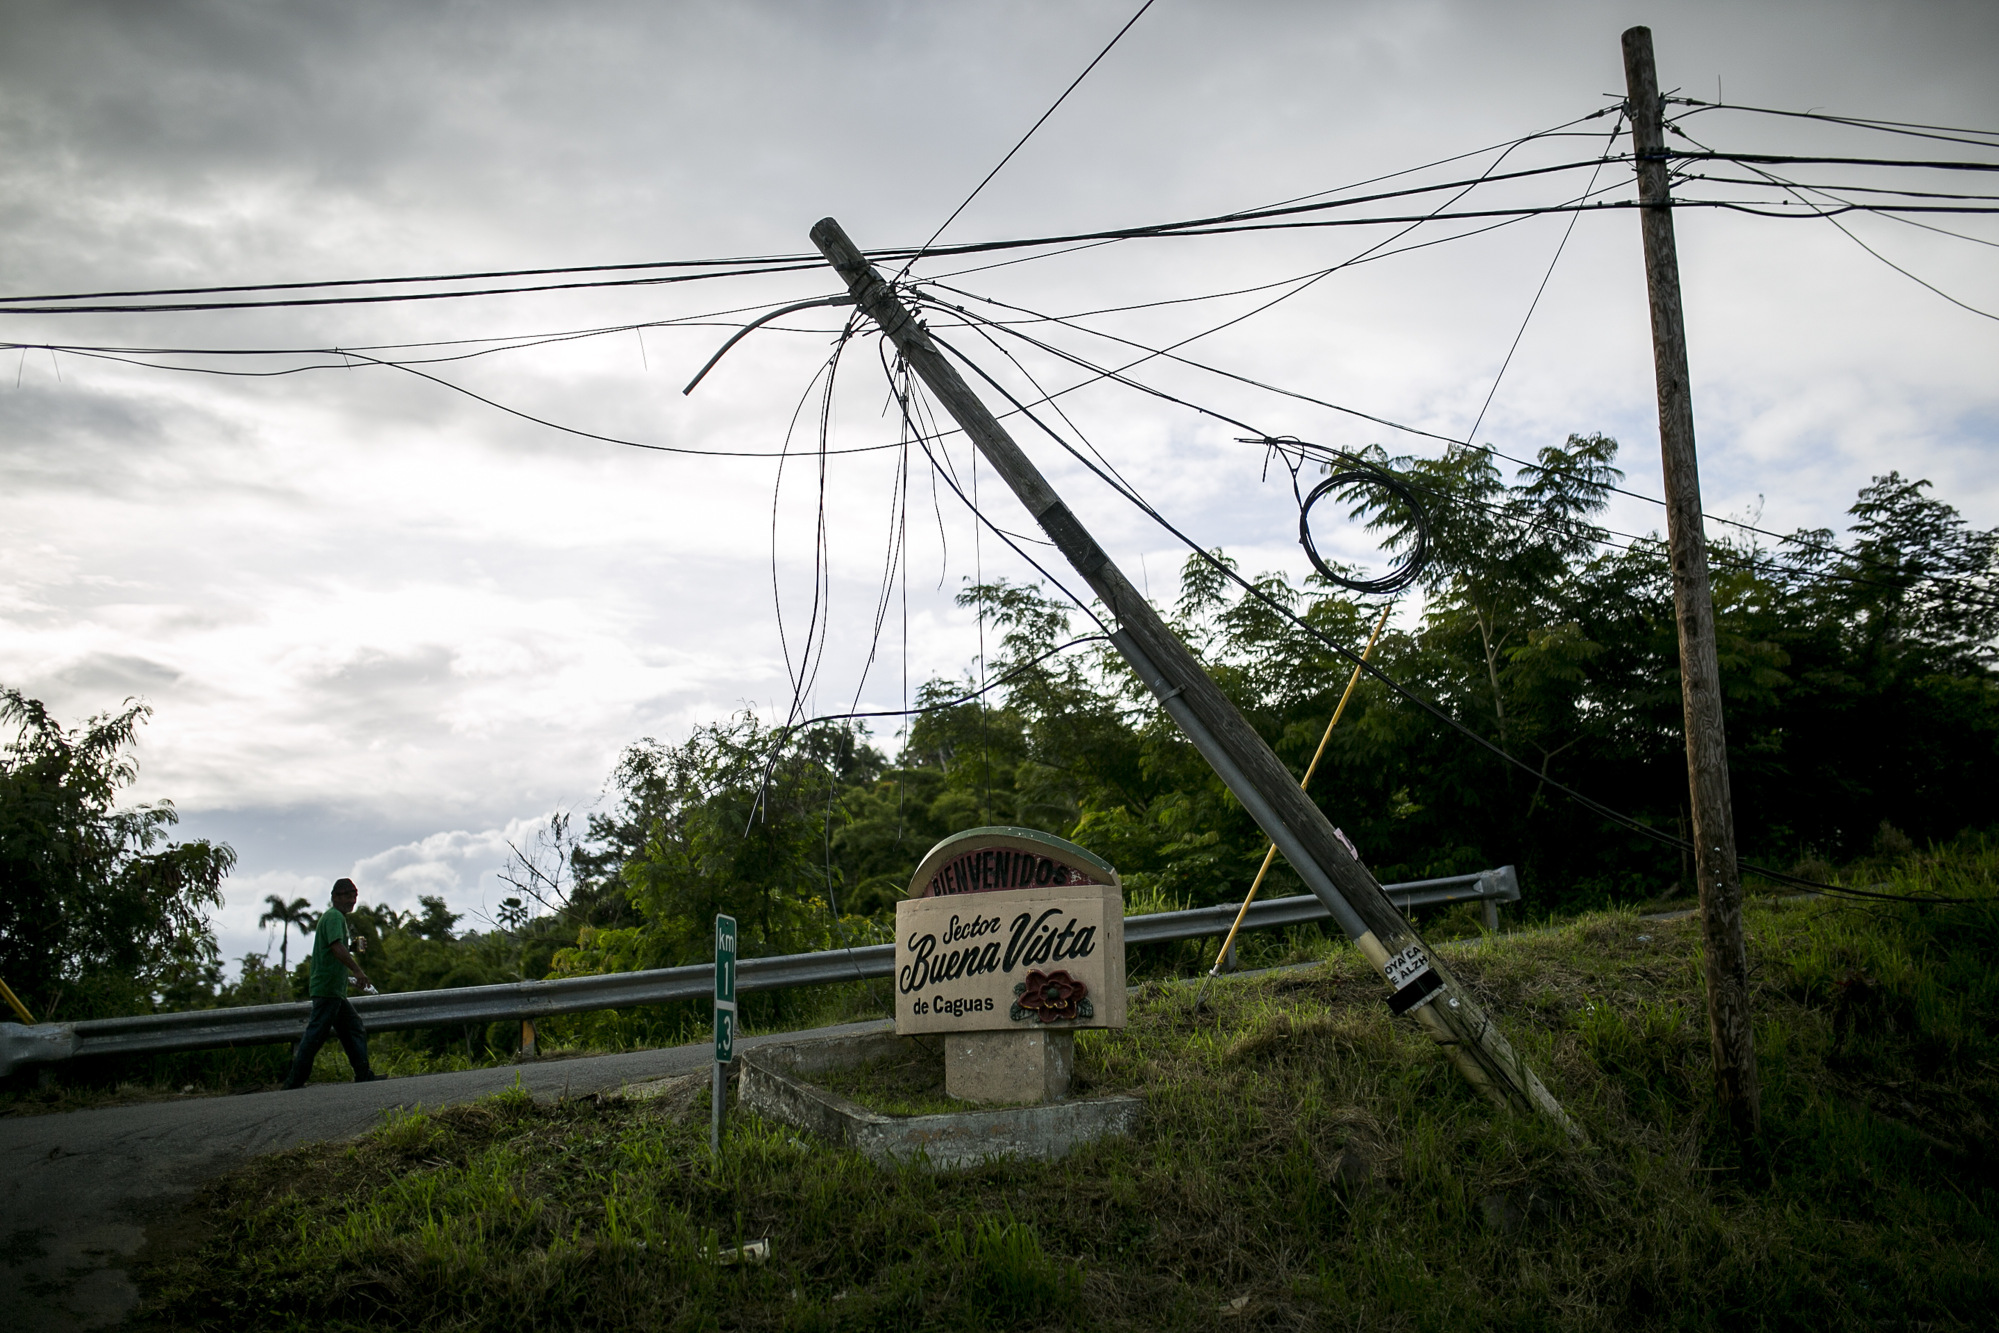 A damaged utility pole in Caguas, Puerto Rico, on Sept. 17, 2018.